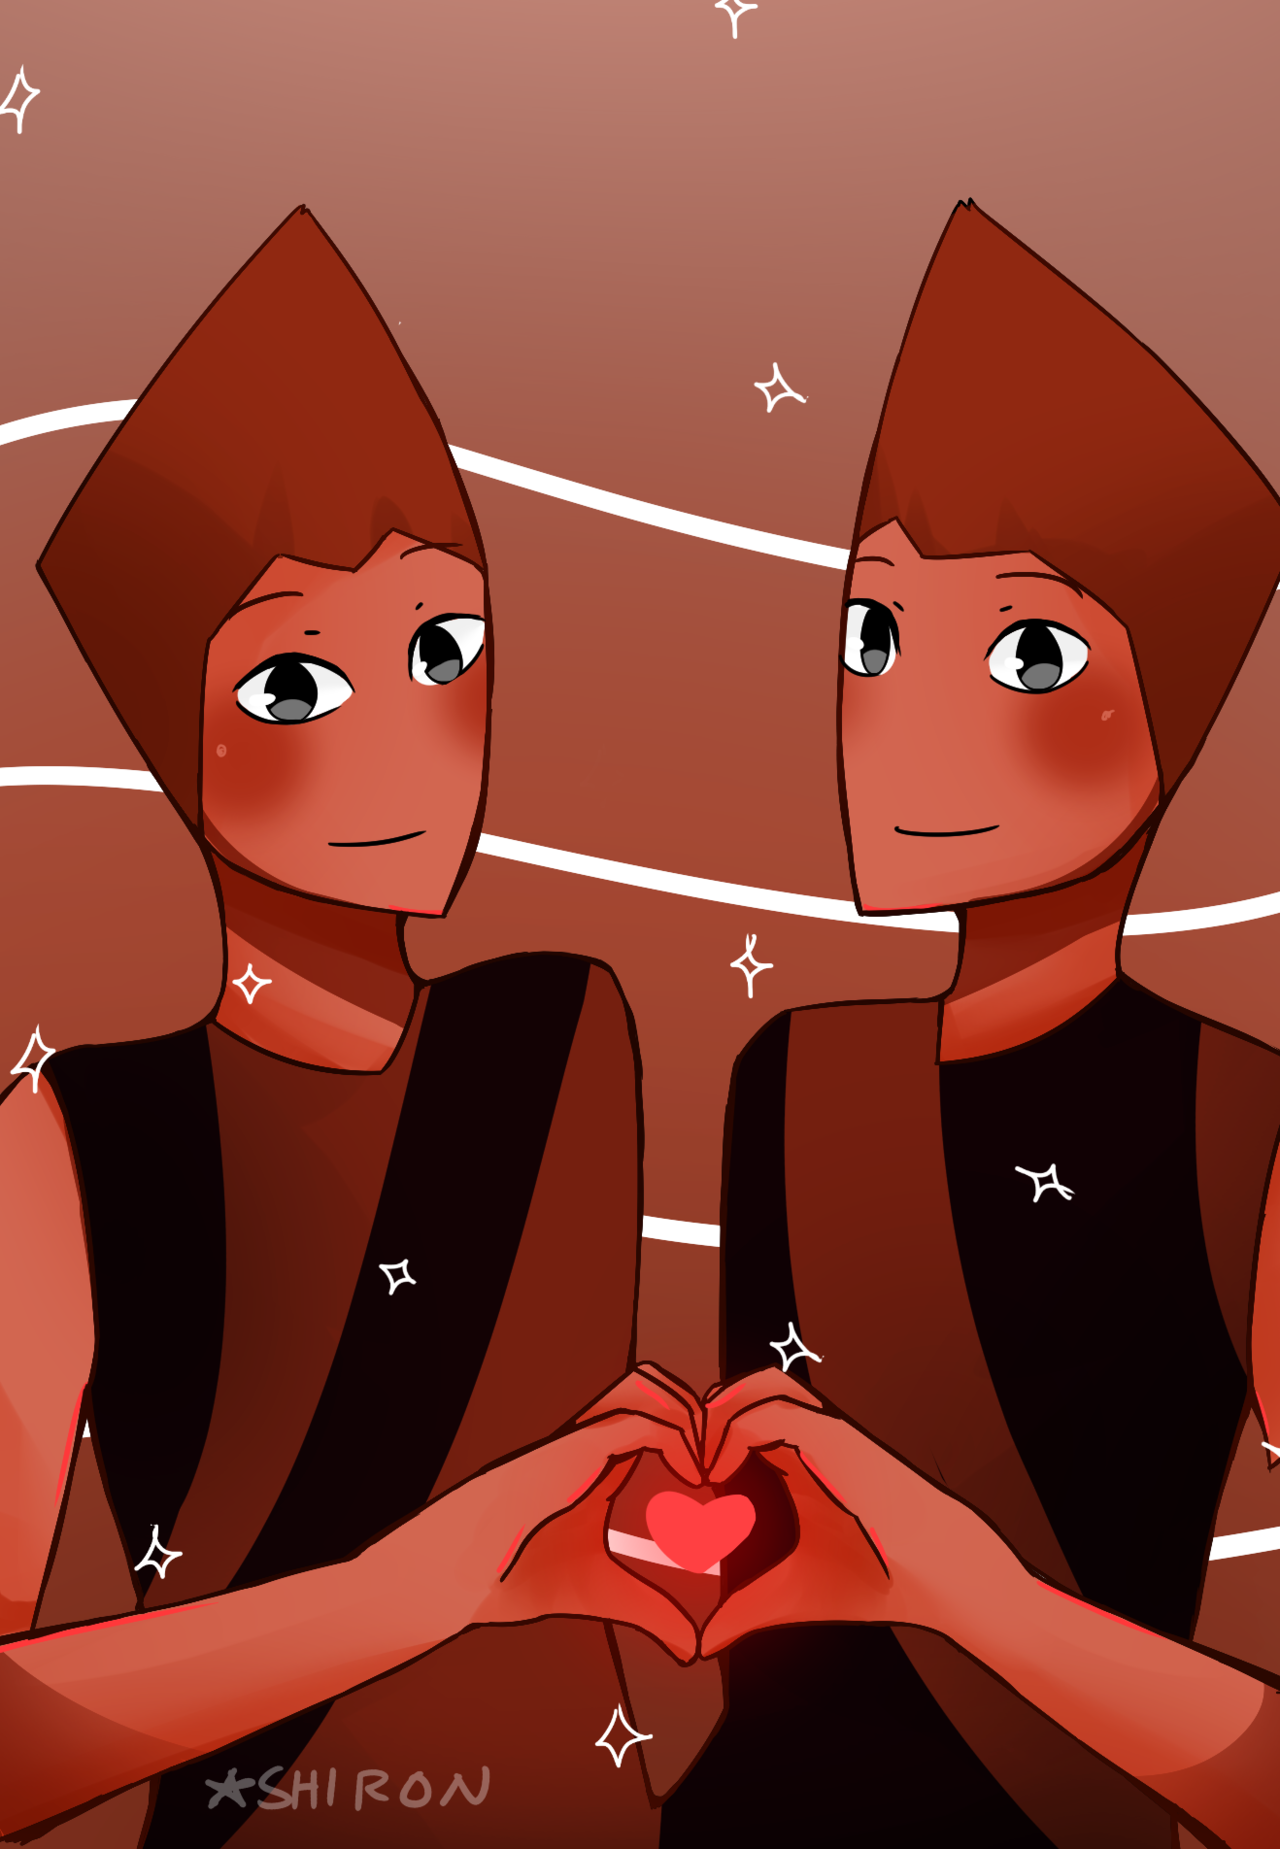 Rutile twins doing the heart thing (I don’t ship them btw its just a cute thing).